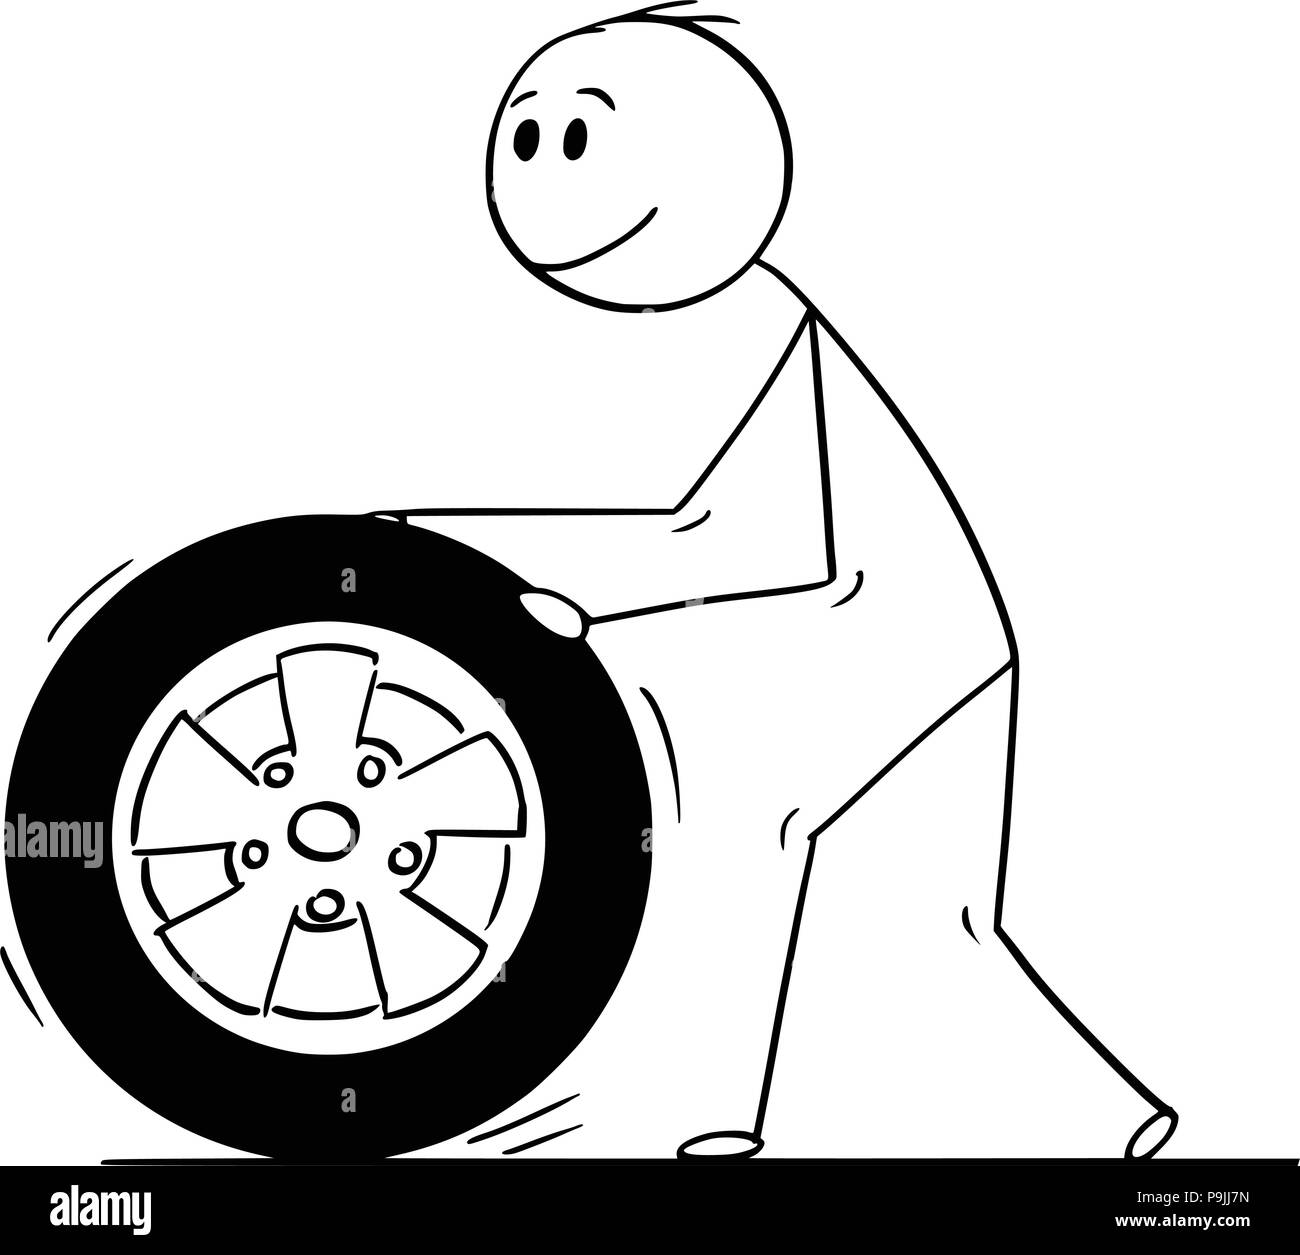 Cartoon of Man Rolling Car Wheel and Tyre Stock Vector